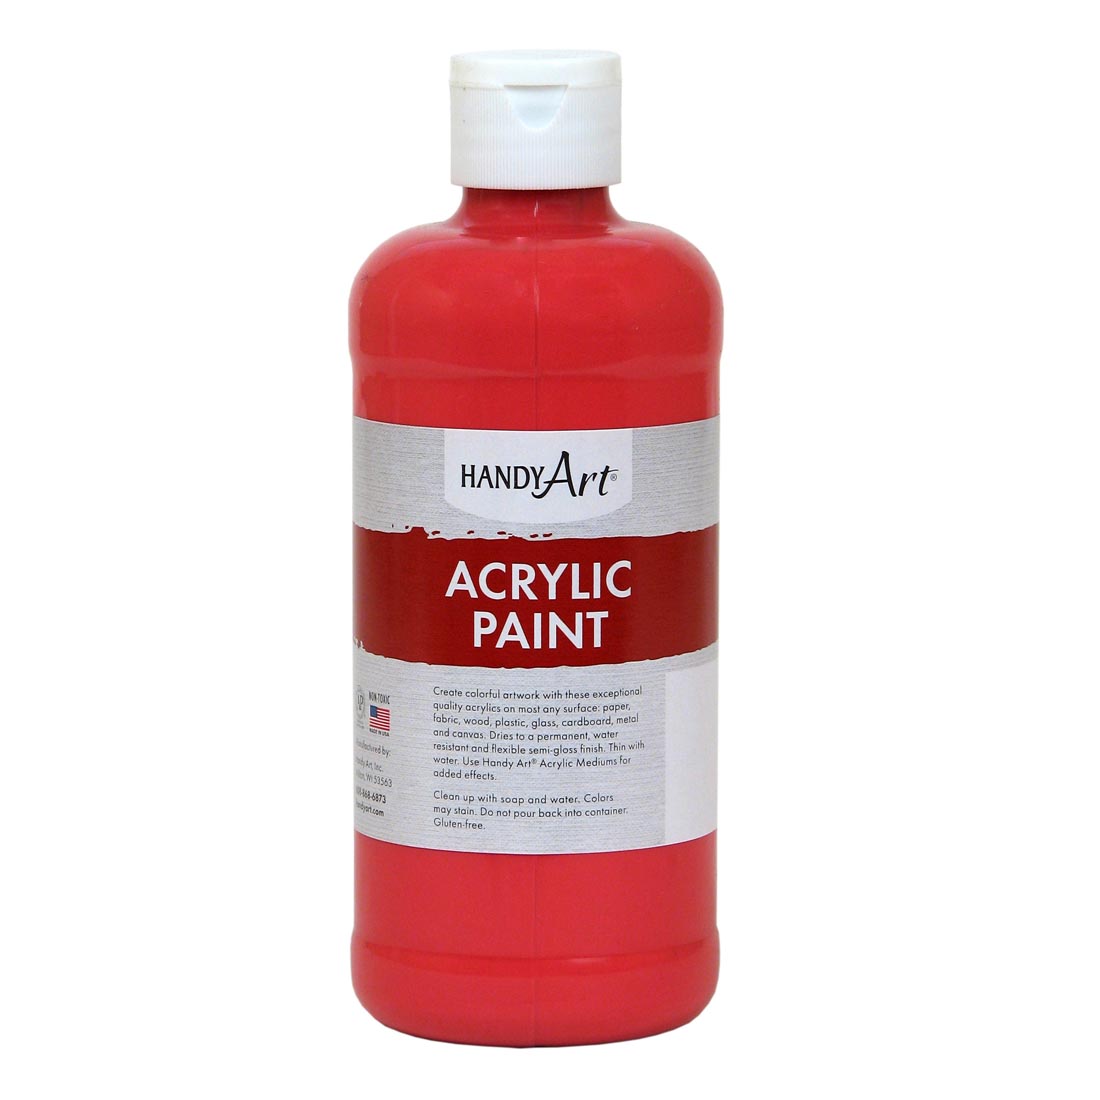 Pint Bottle of Phthalo Red Handy Art Acrylic Paint